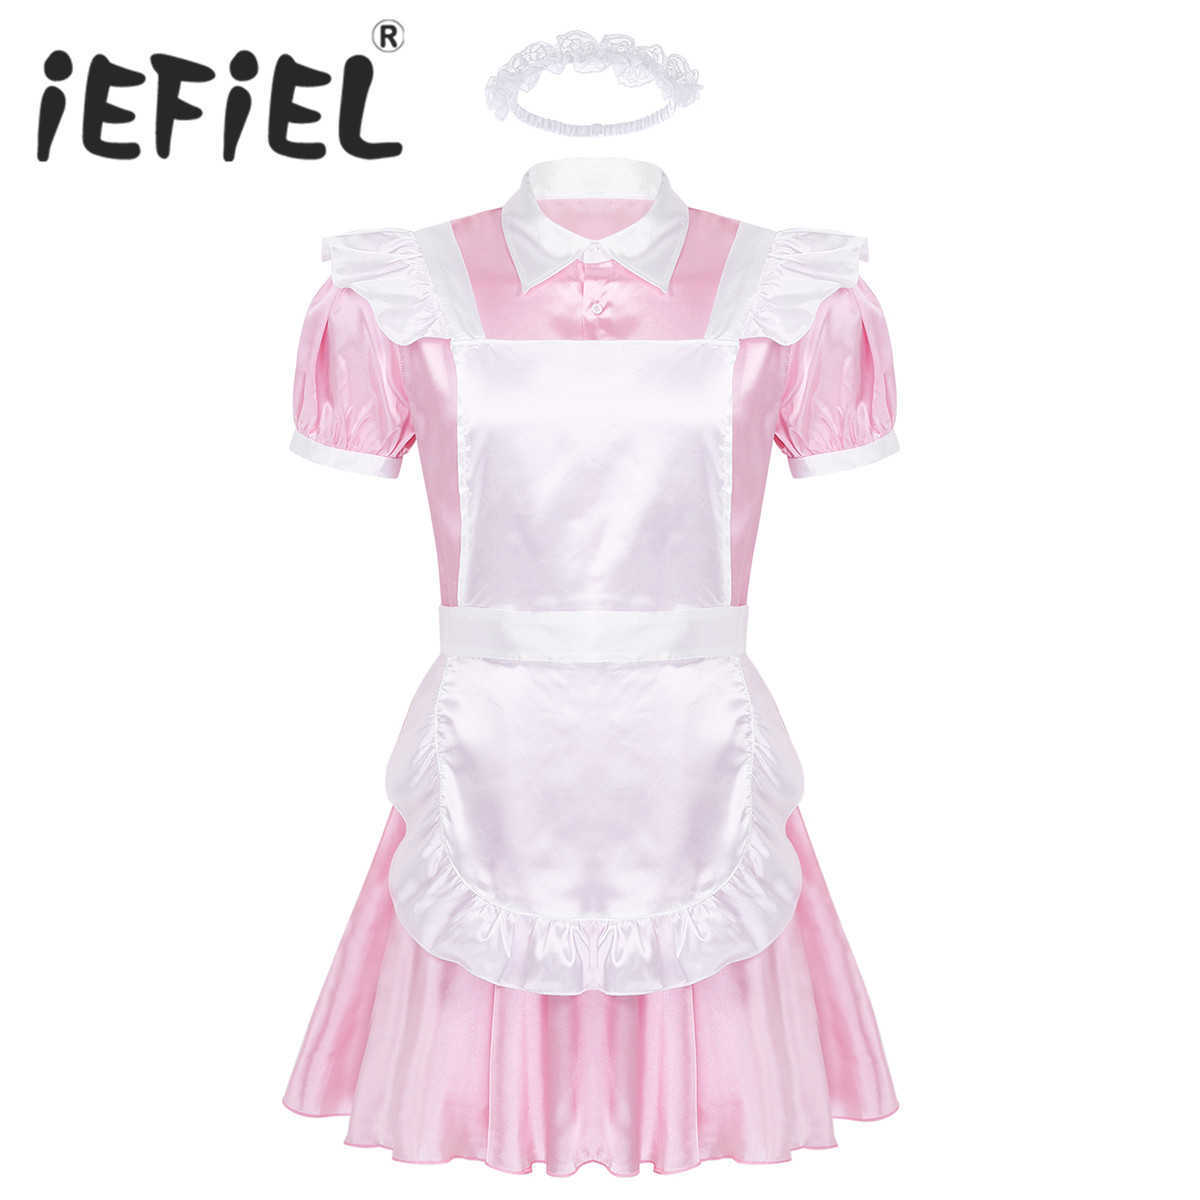 

Mens Male Adults Sissy Maid Cosplay Costume Puff Sleeve Front Button Down Dress with Apron and Headband for Role Play Halloween Y0903, Packing bag